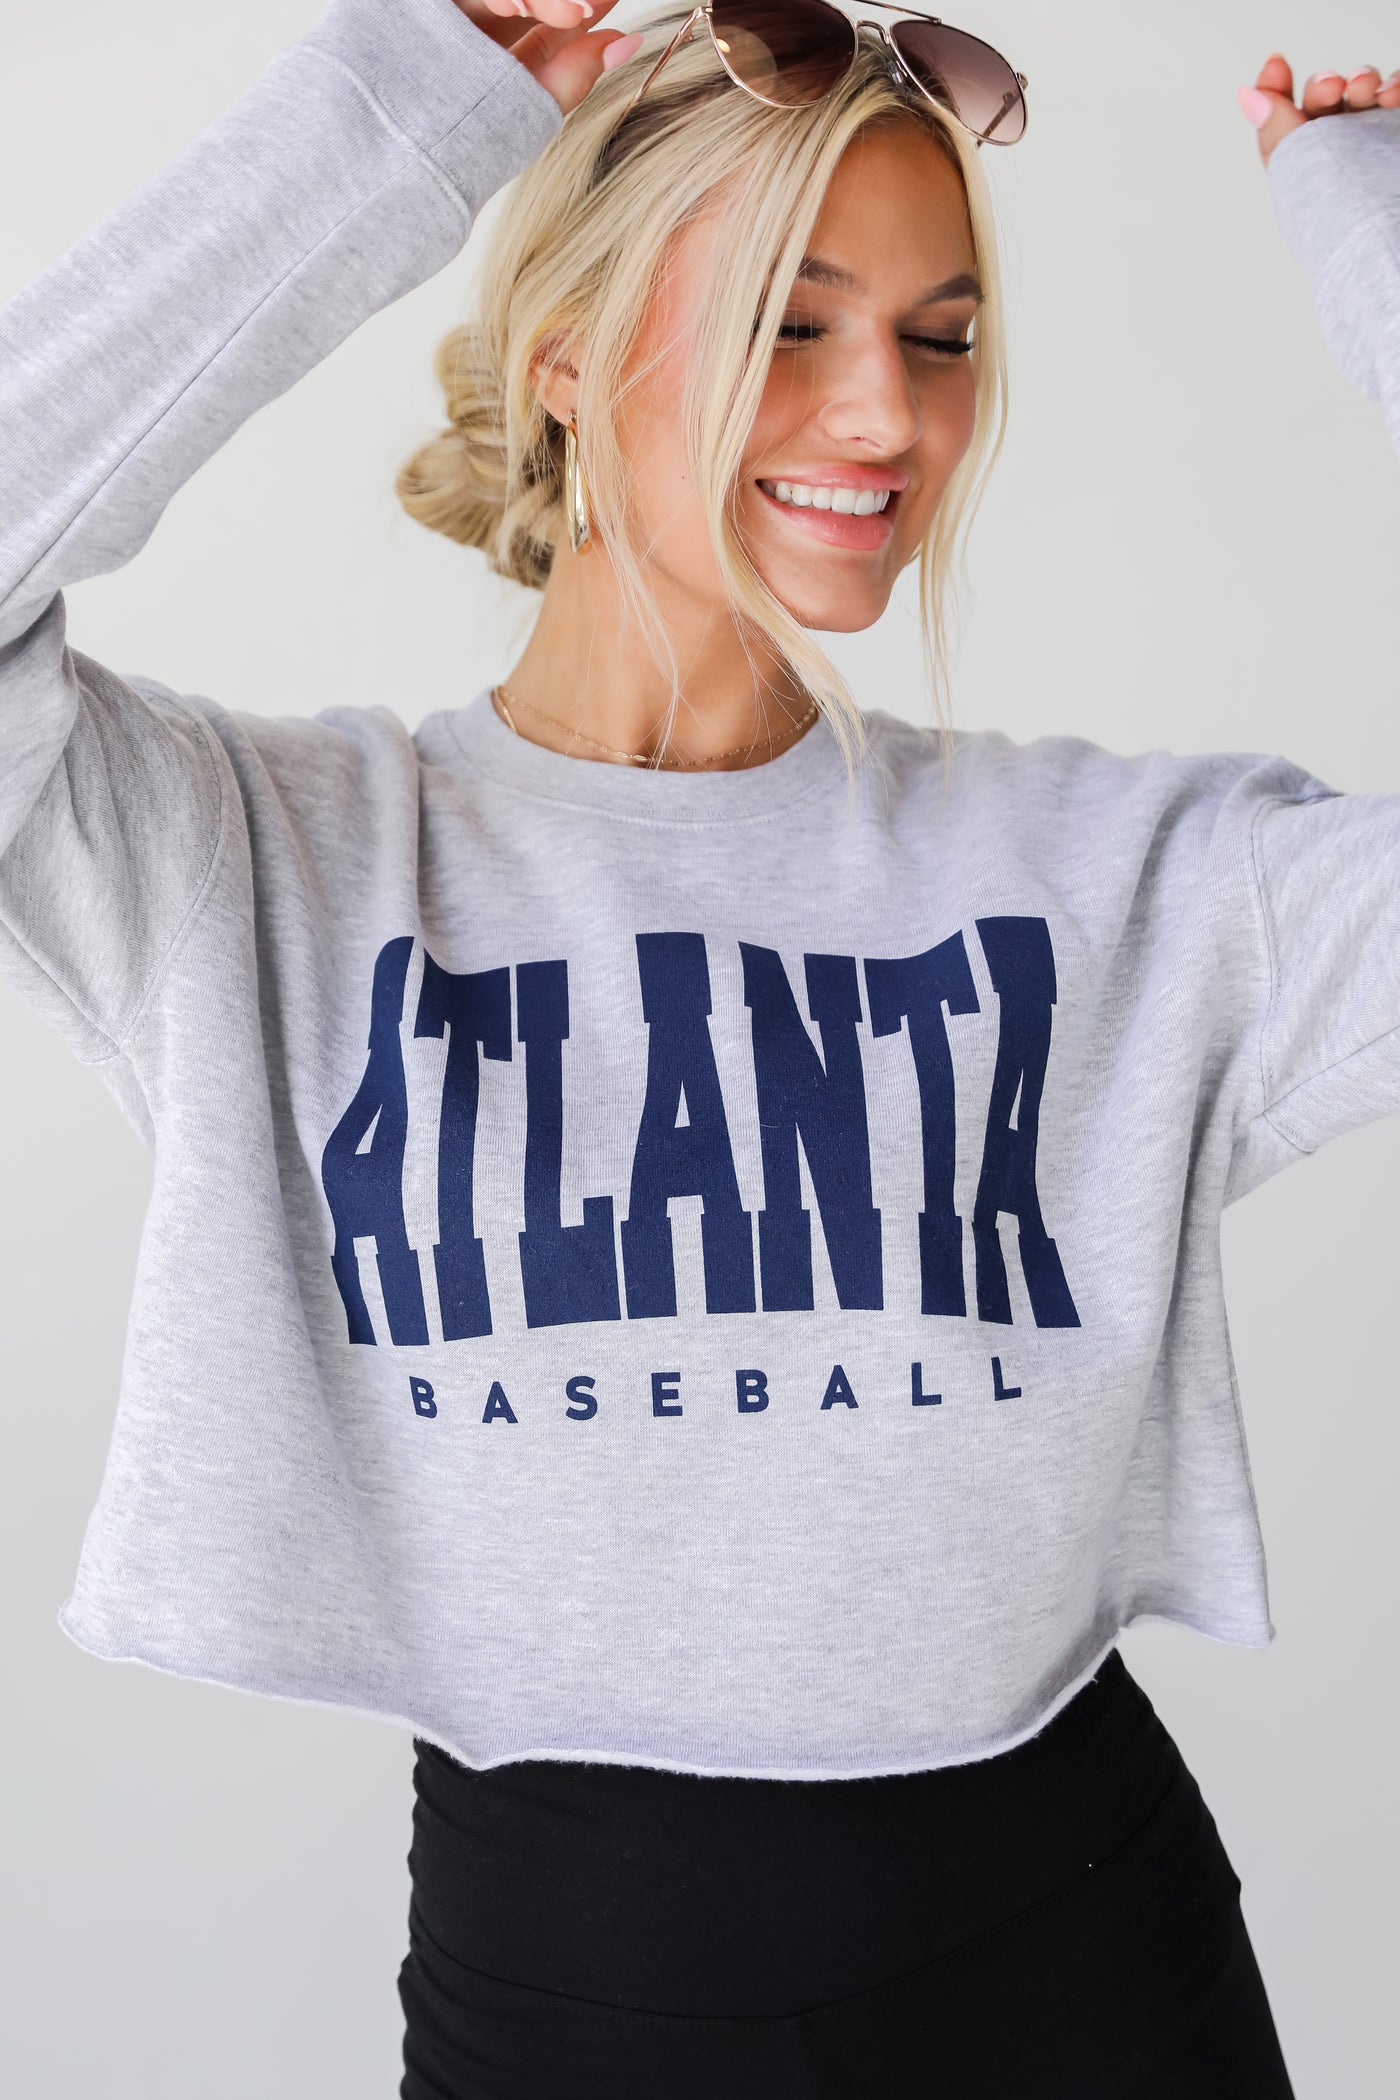 Heather Grey Atlanta Baseball Cropped Pullover. Braves Game Day Outfit Cold. Cropped Sweatshirt. Sports sweatshirt 